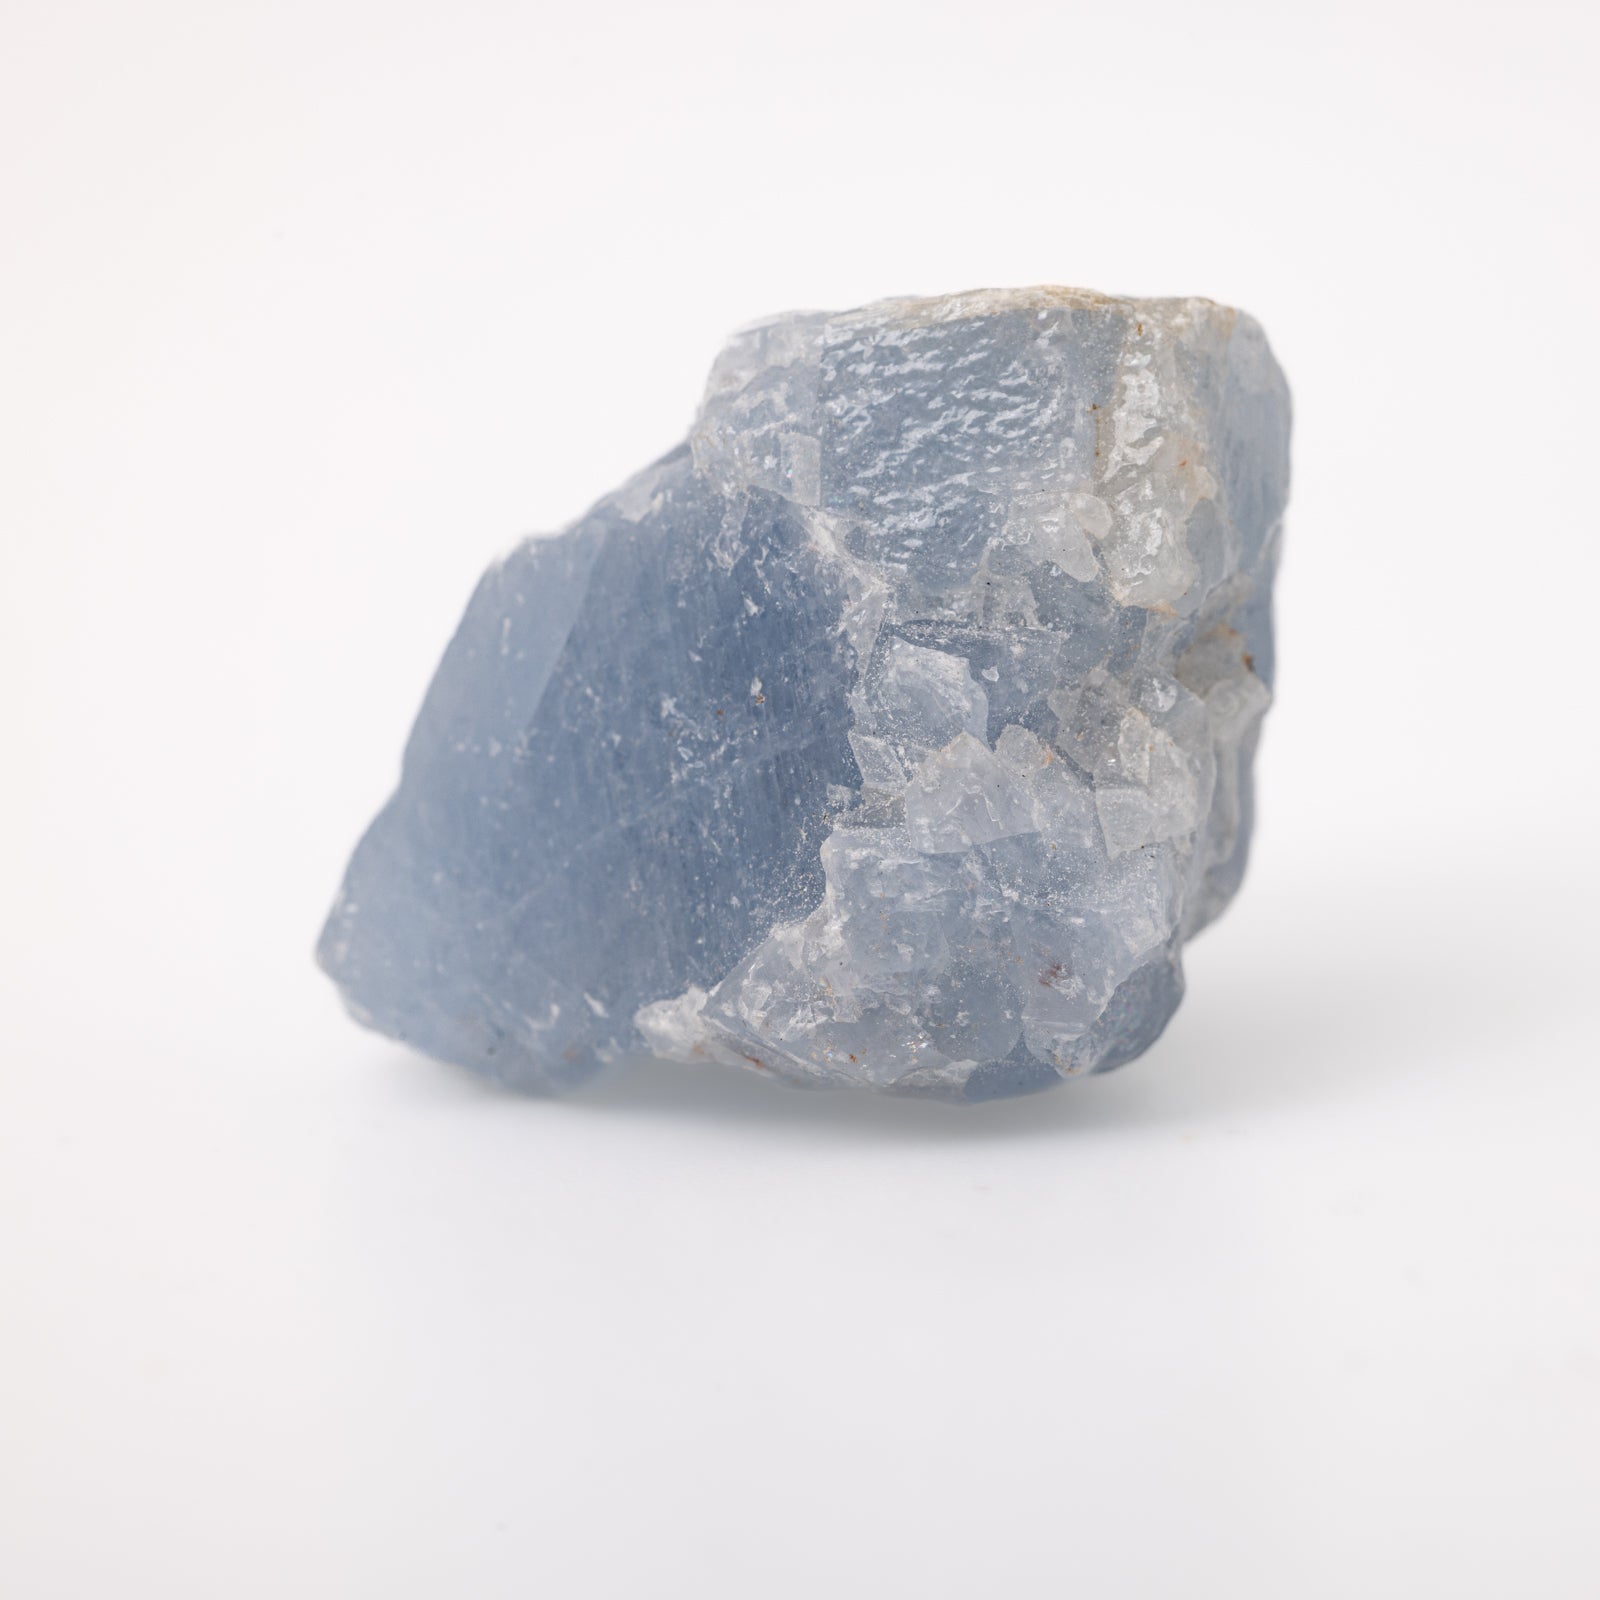 : Blue Calcite rough pieces, approximately 1" in size, handpicked for you by Juniper Stones